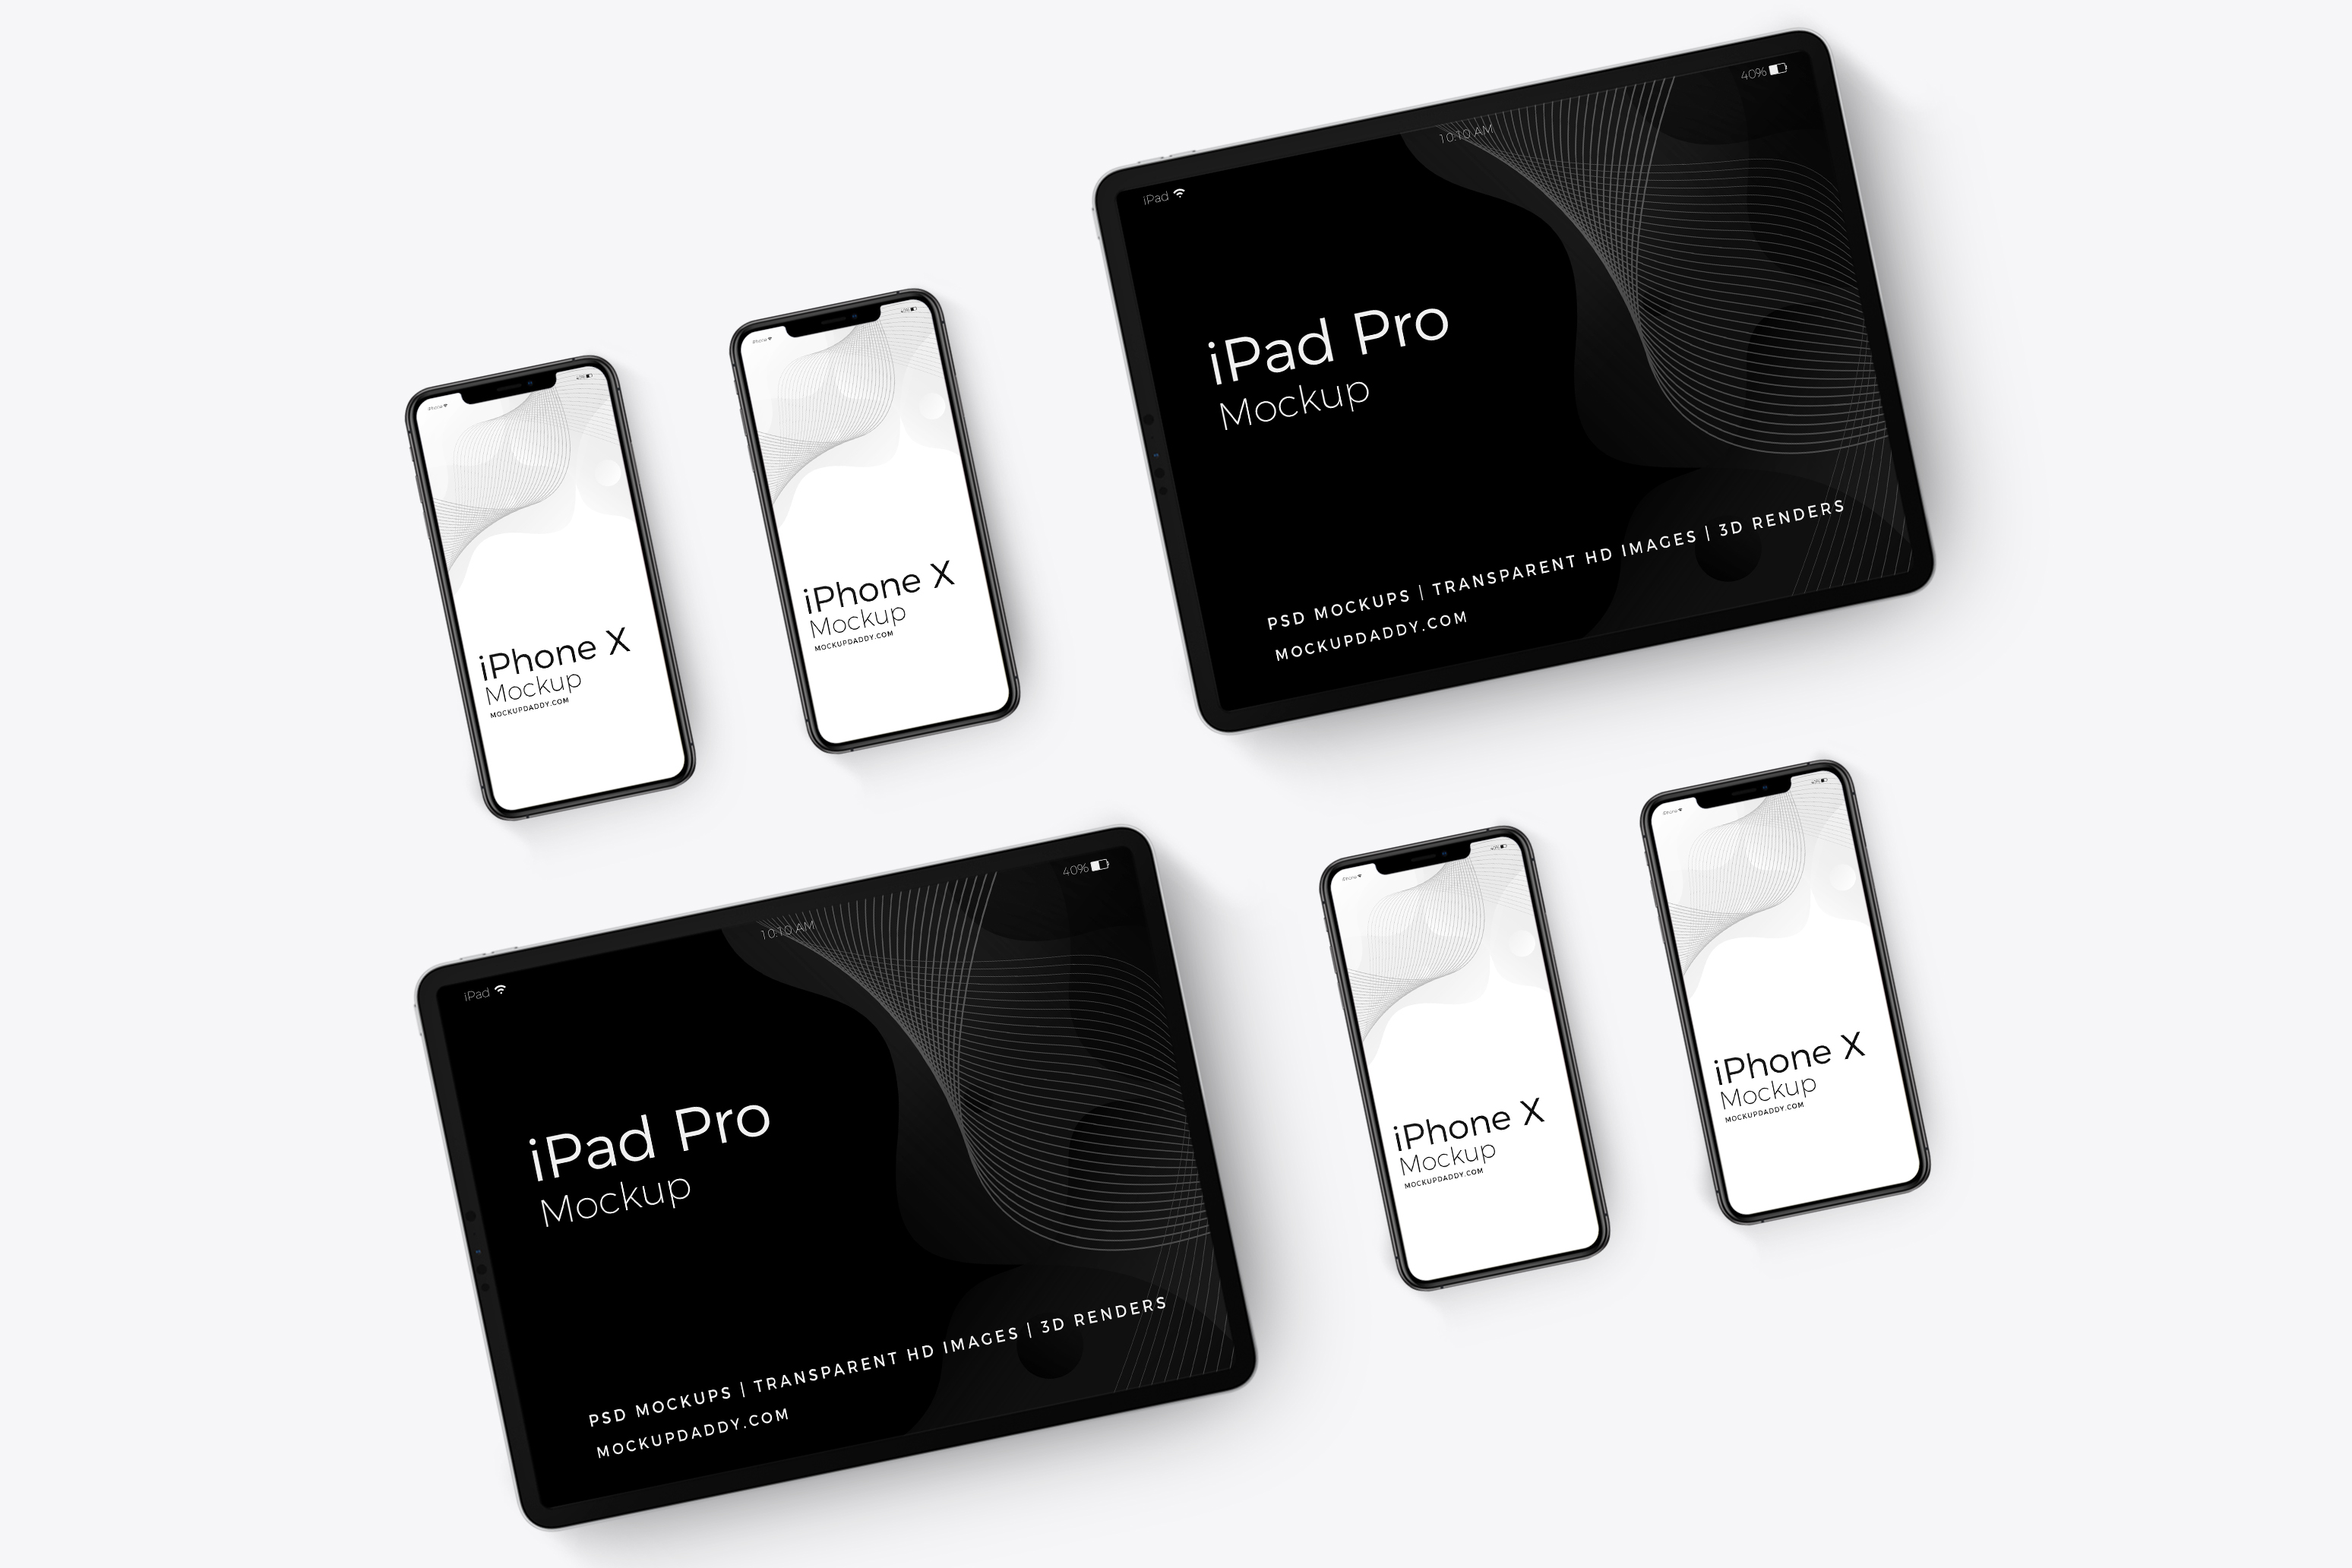 Apple Devices Iphone x and Ipad Mockup